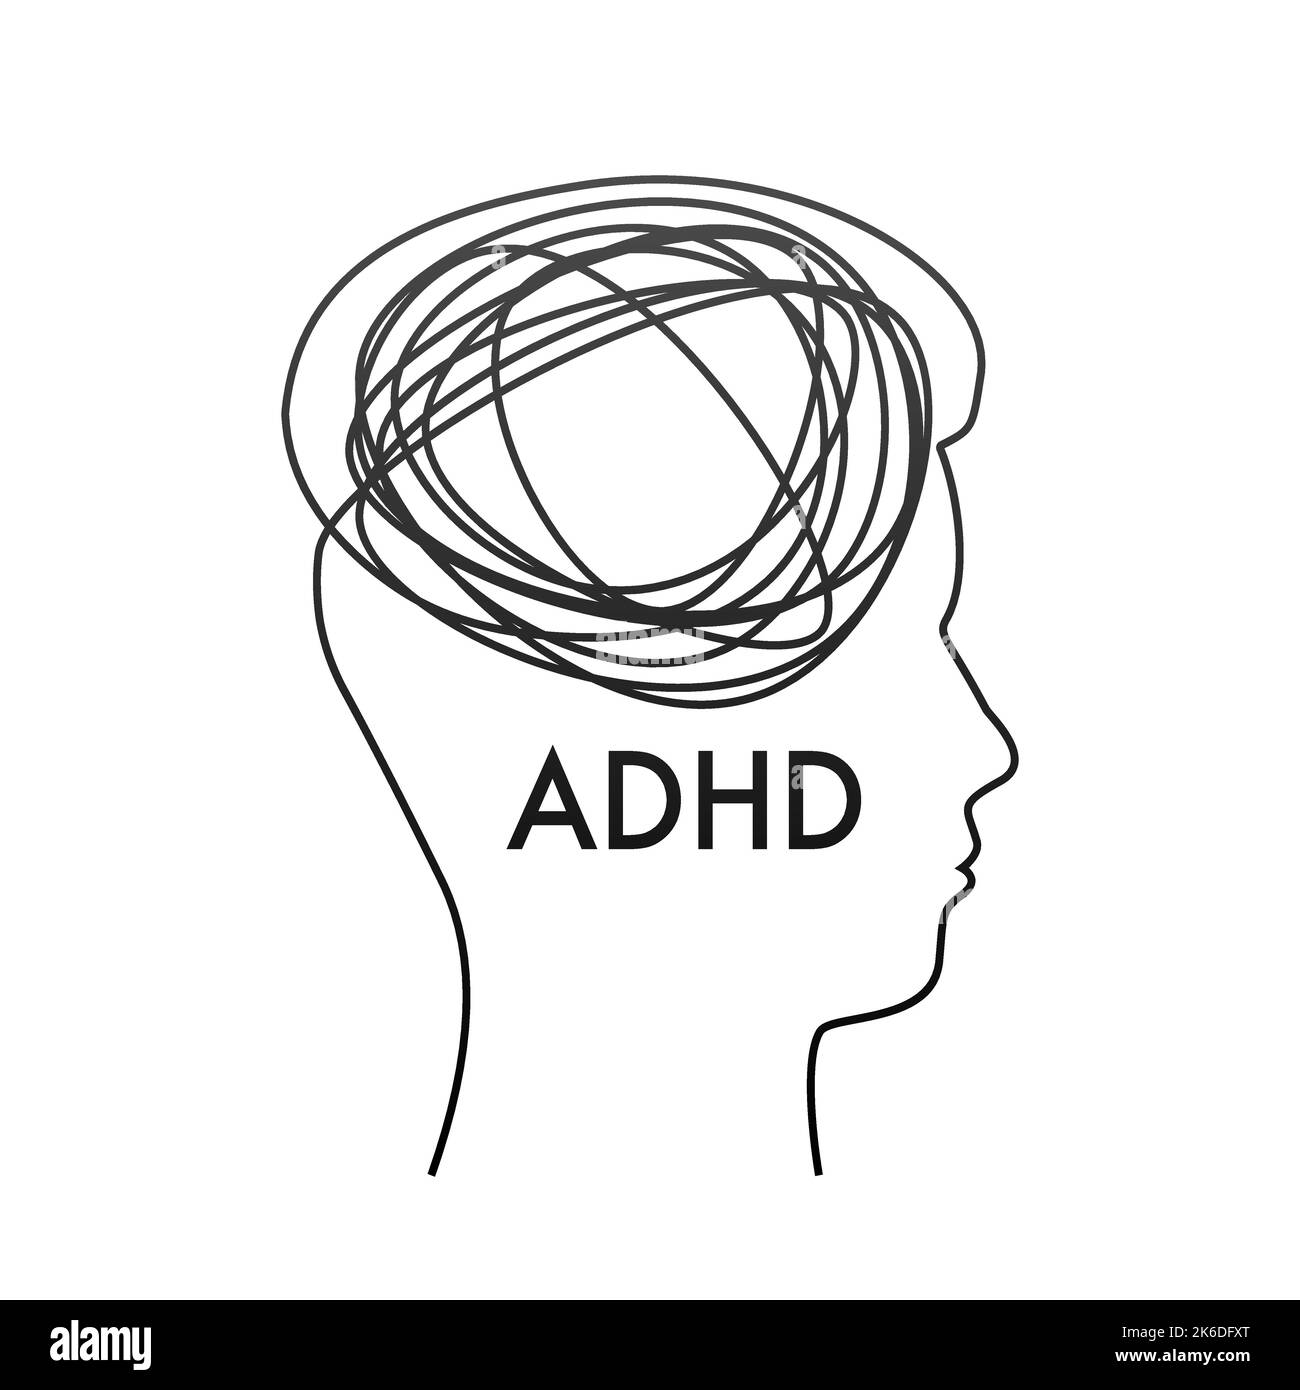 ADHD Attention disorder. Prevent ADHD. Vector stock illustration. Stock Vector